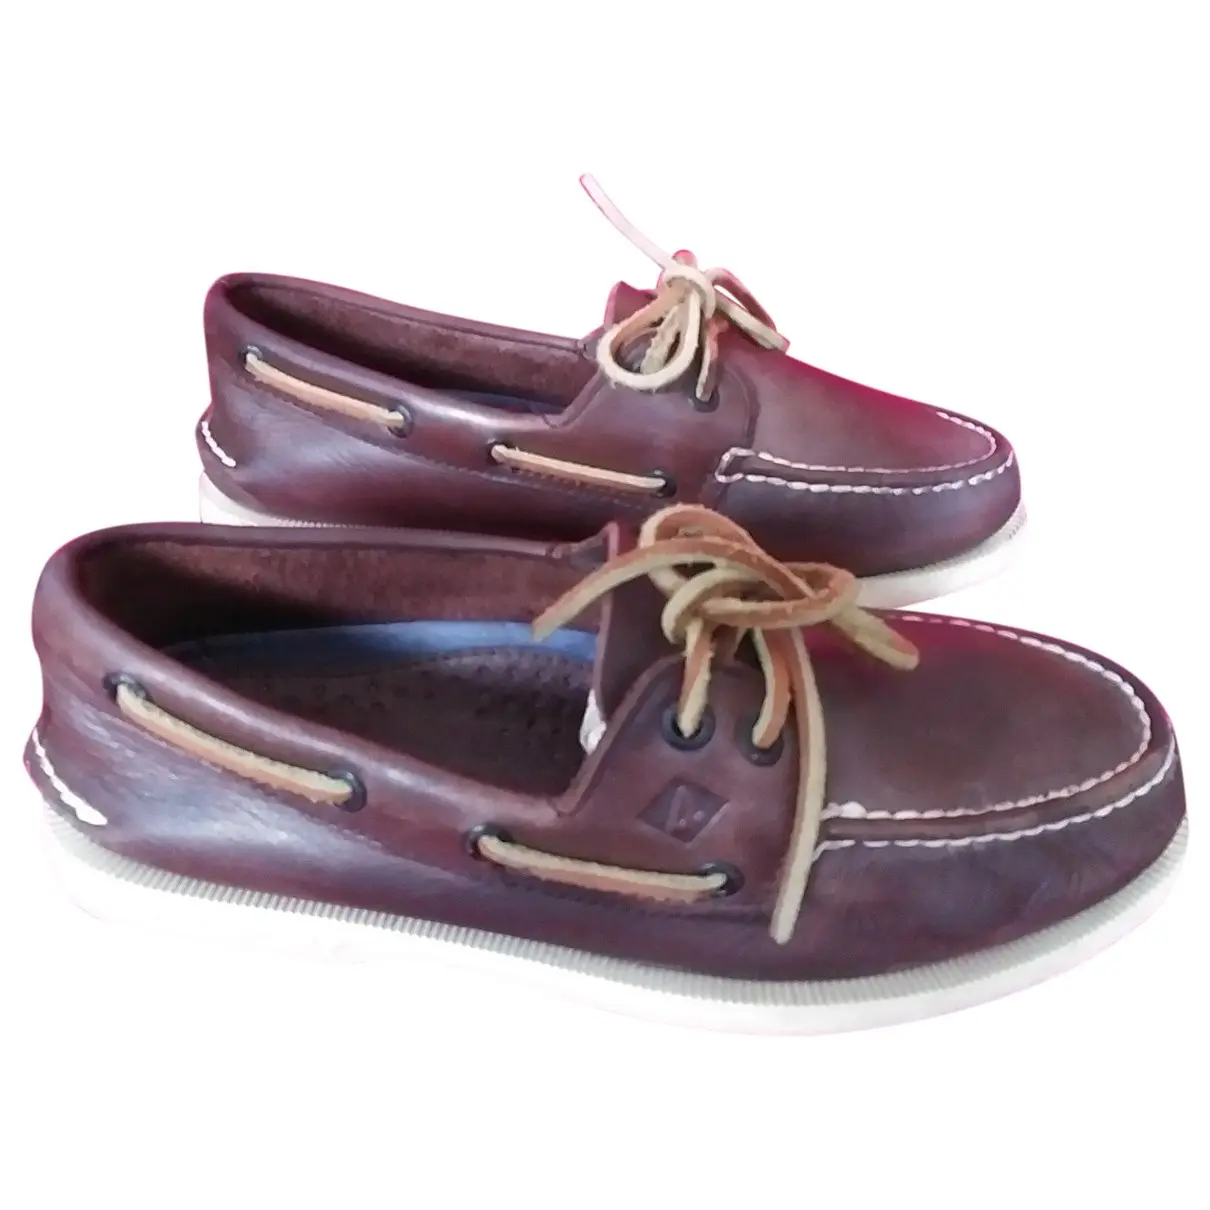 Sperry Leather flats for sale